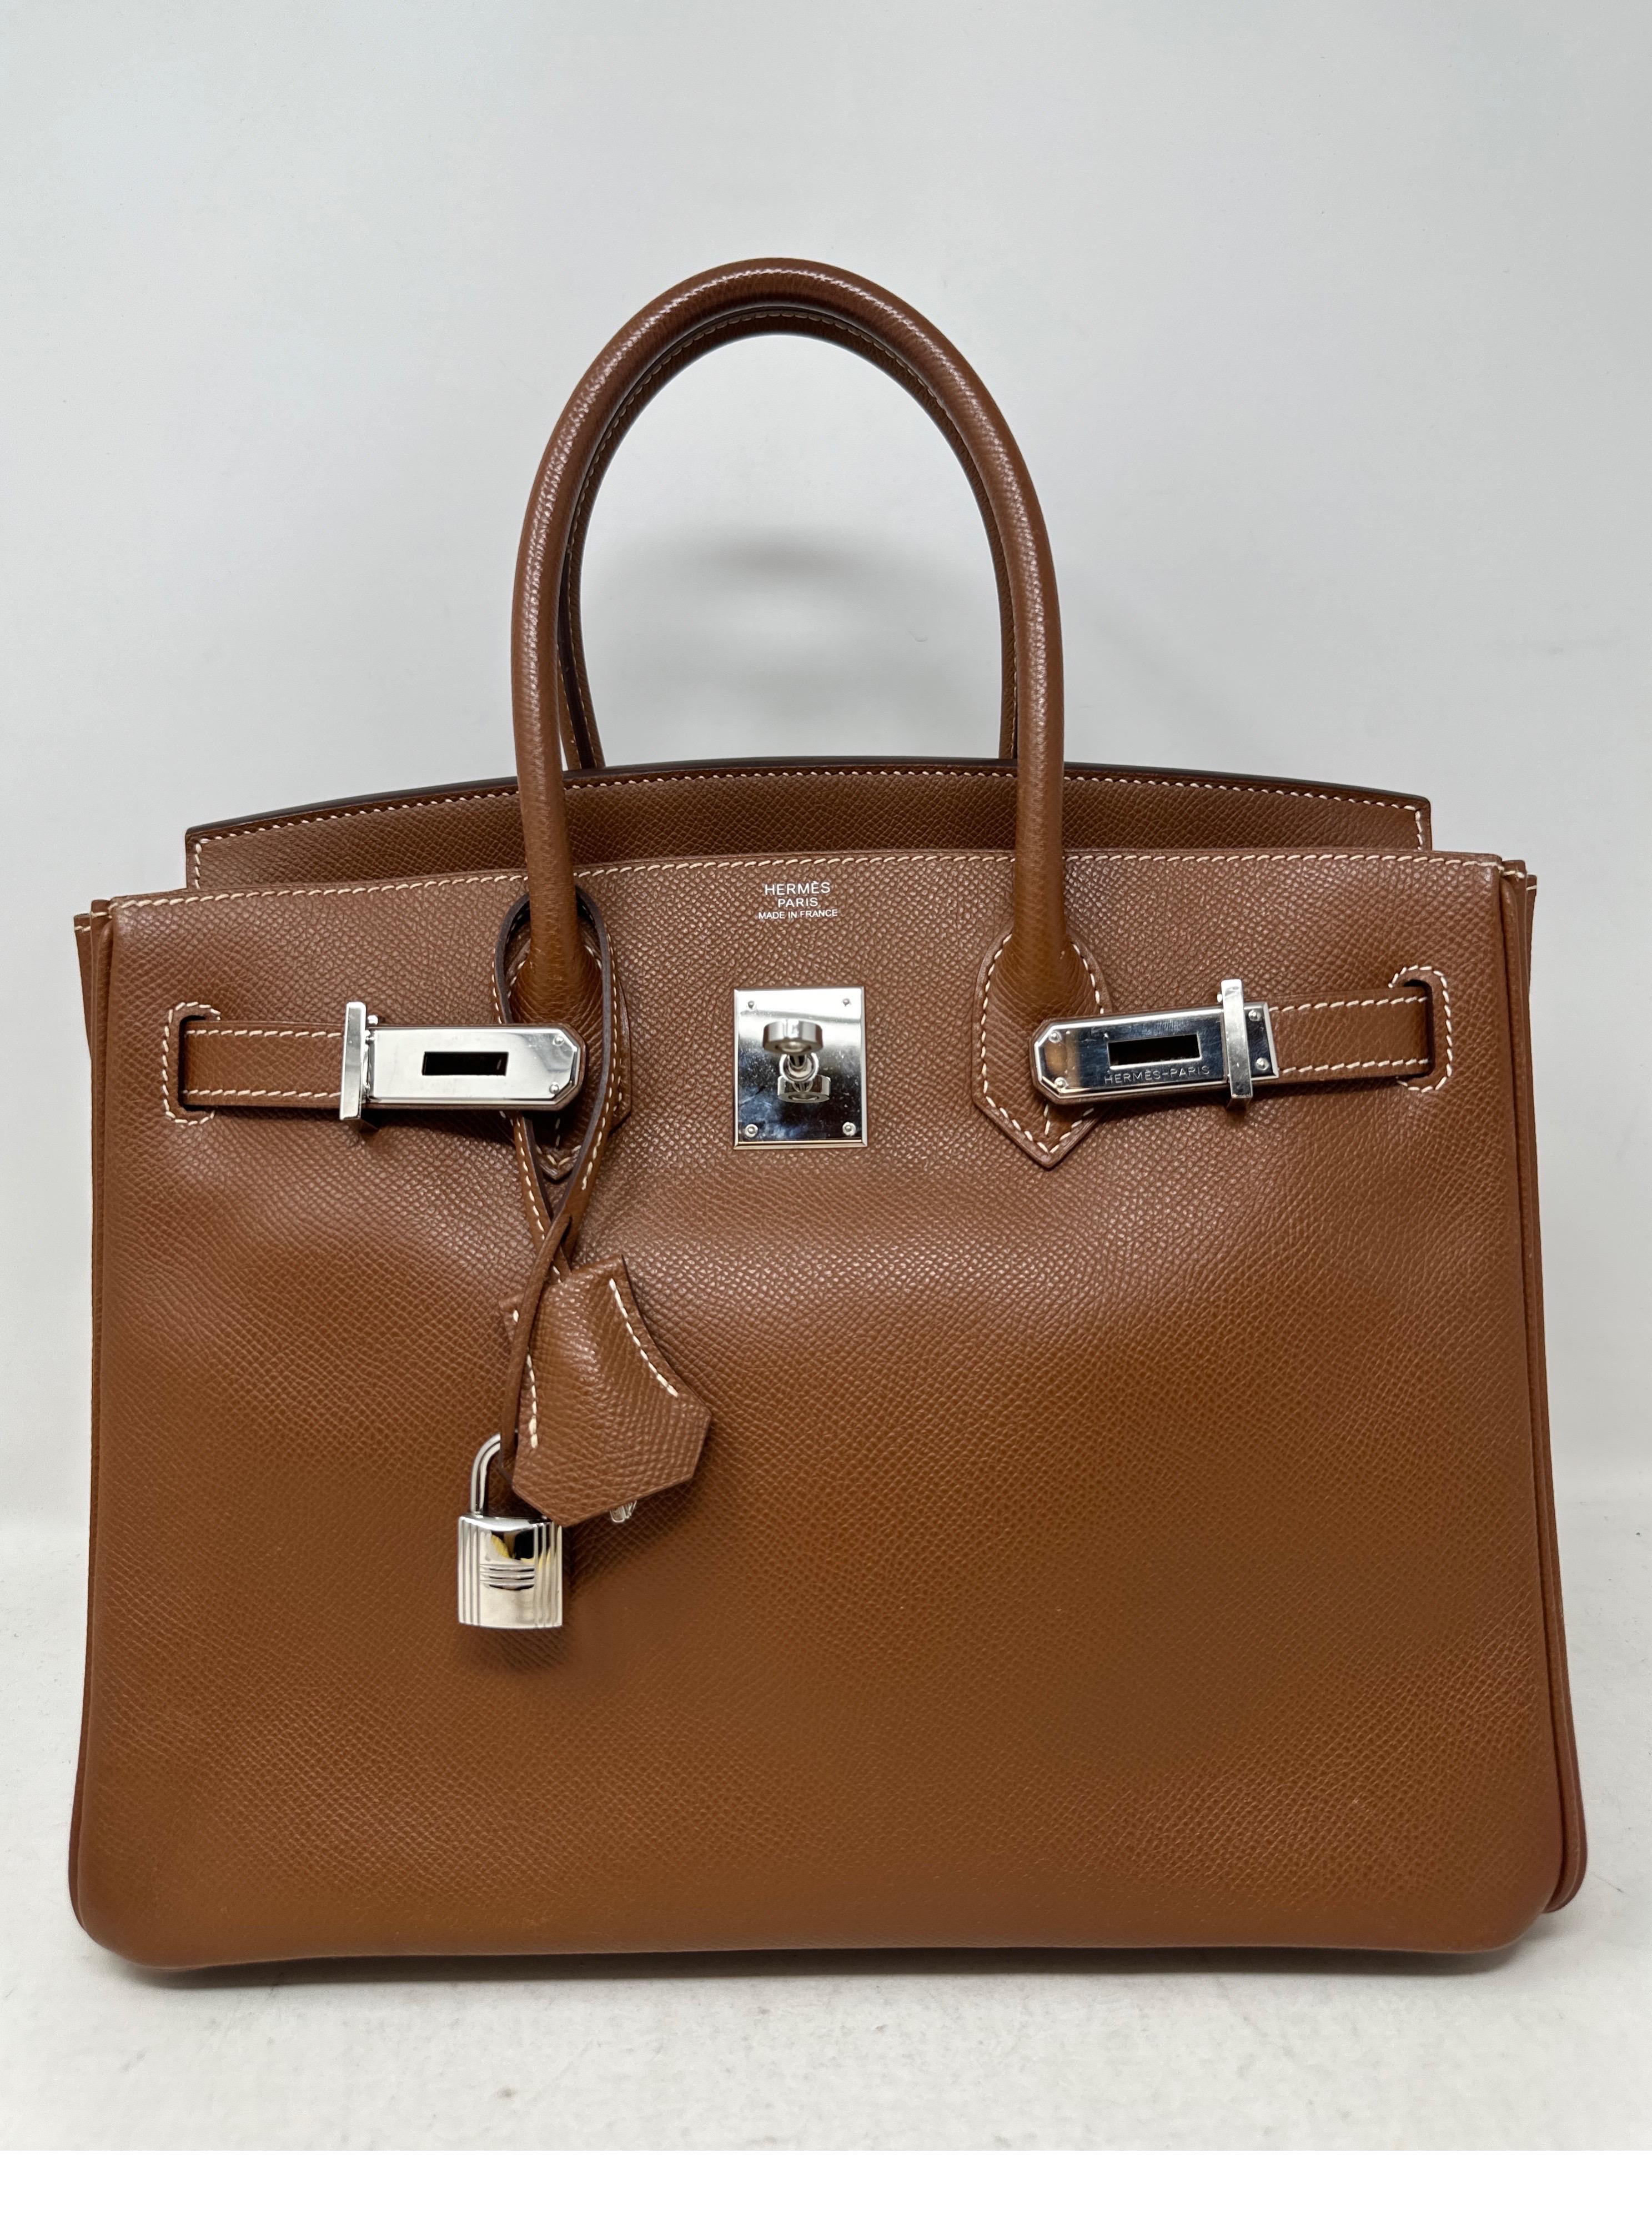 Hermes Gold Birkin 30 Bag In Good Condition For Sale In Athens, GA